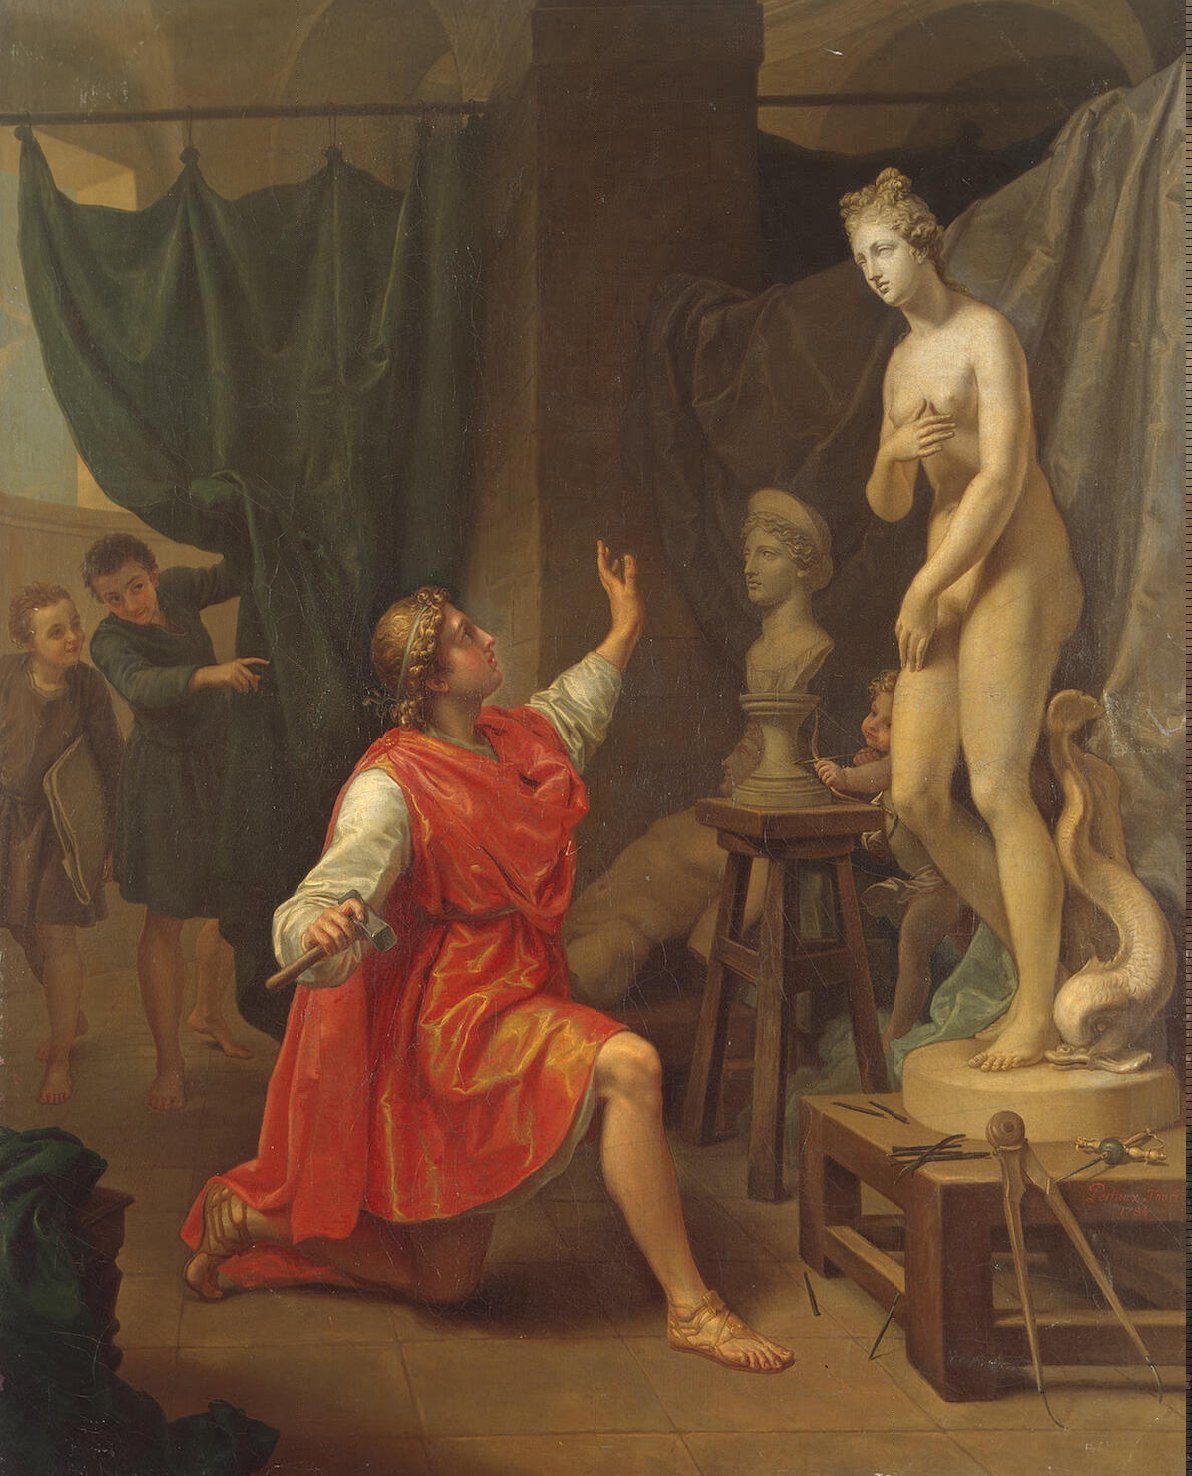 This painting represents Pygmalion, admiring the statue of Galatea. Aphrodite had given her life, turning the sculpture into a real woman.